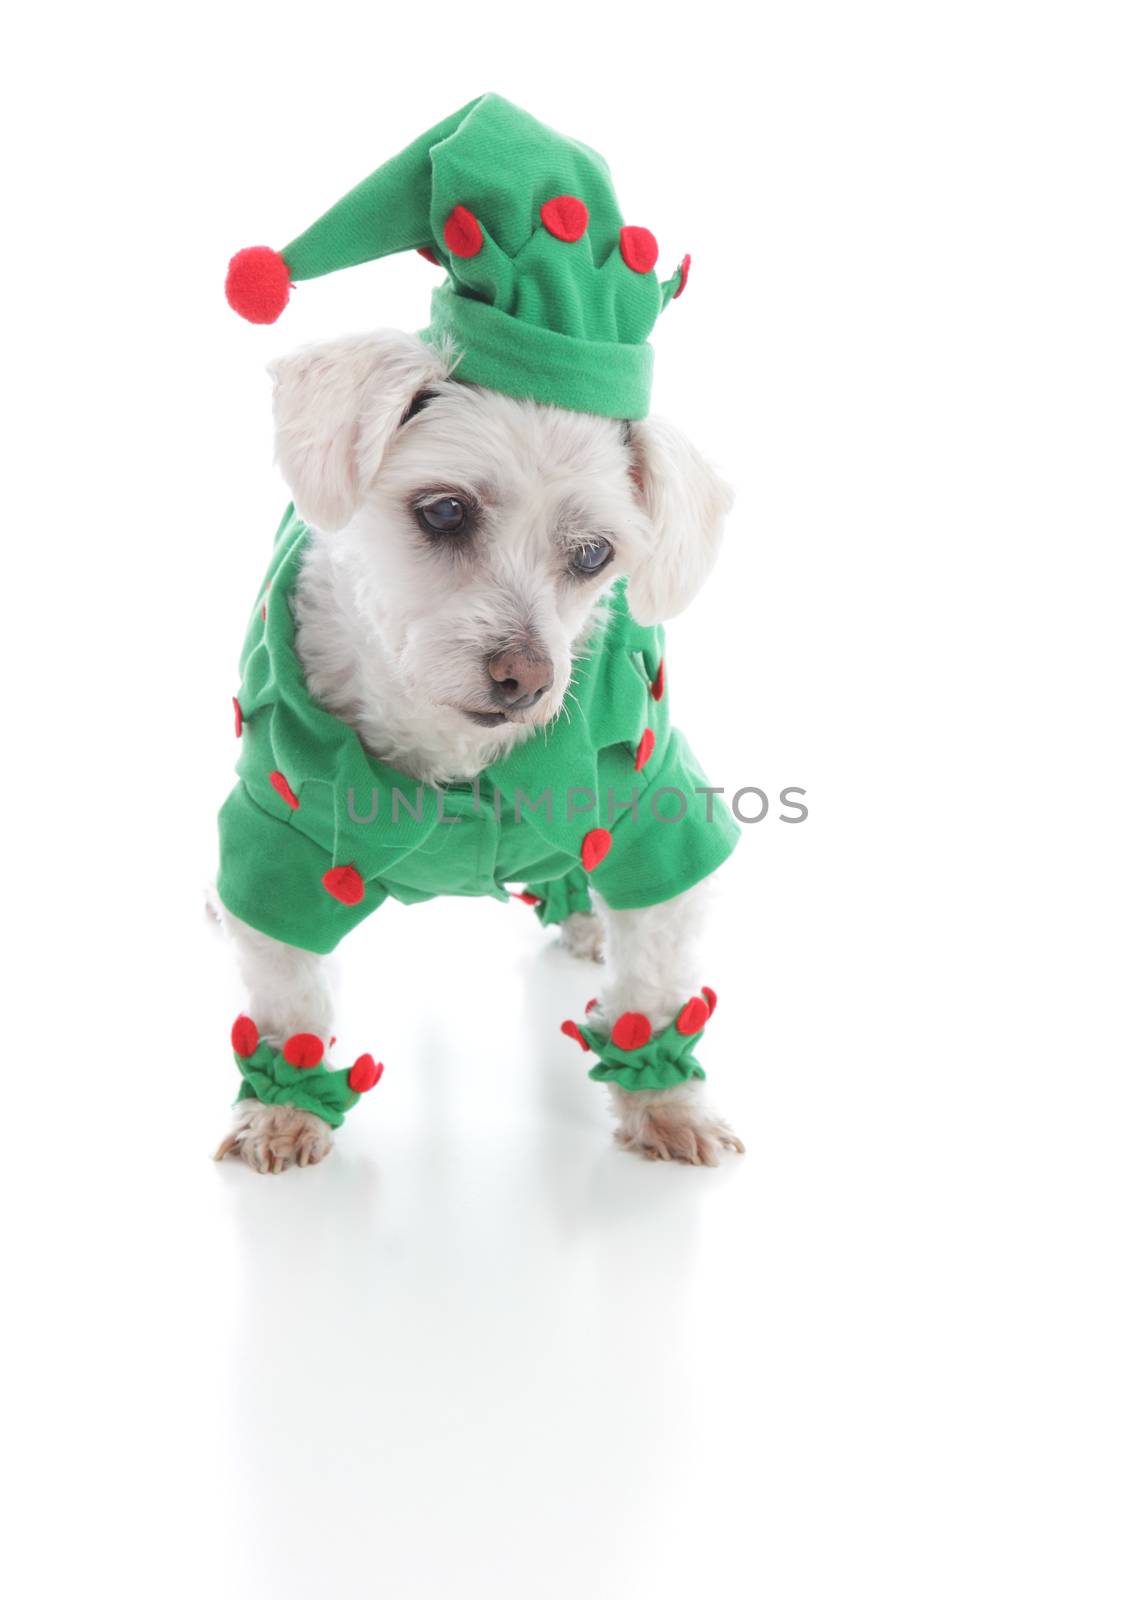 Small pet dressed as an elf, jester or leprechaun is looking down at something.  White background.